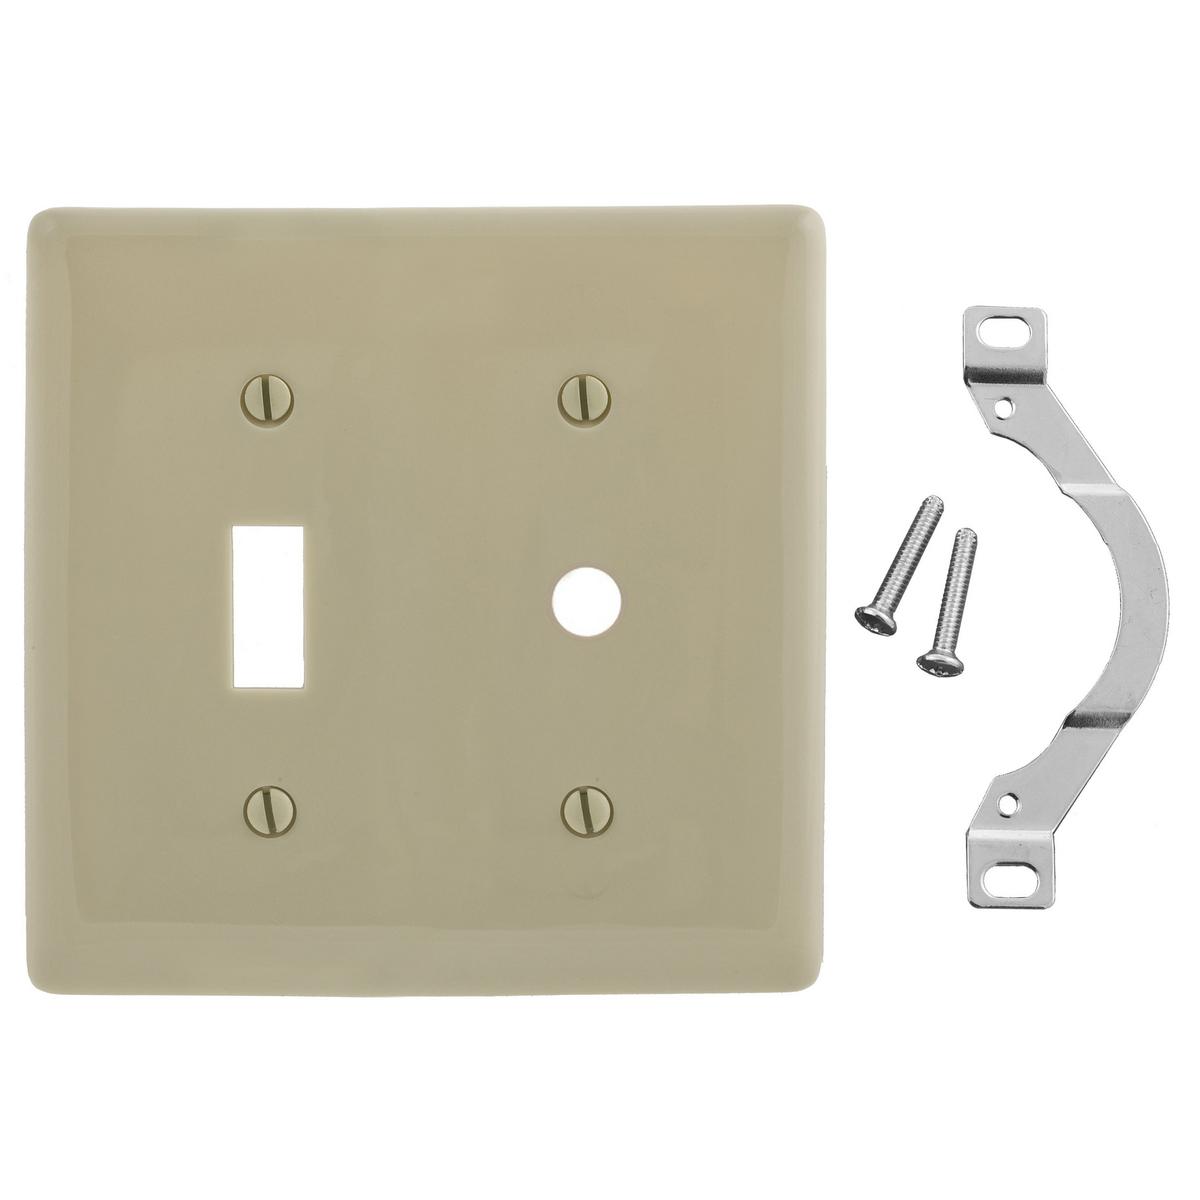 Hubbell NP112I Wallplates, Nylon, 2-Gang, 1) Toggle, 1) .406" Opening, Ivory  ; Reinforcement ribs for extra strength ; High-impact, self-extinguishing nylon material ; Captive screw feature holds mounting screw in place ; Standard Size is 1/8" larger to give you extra 